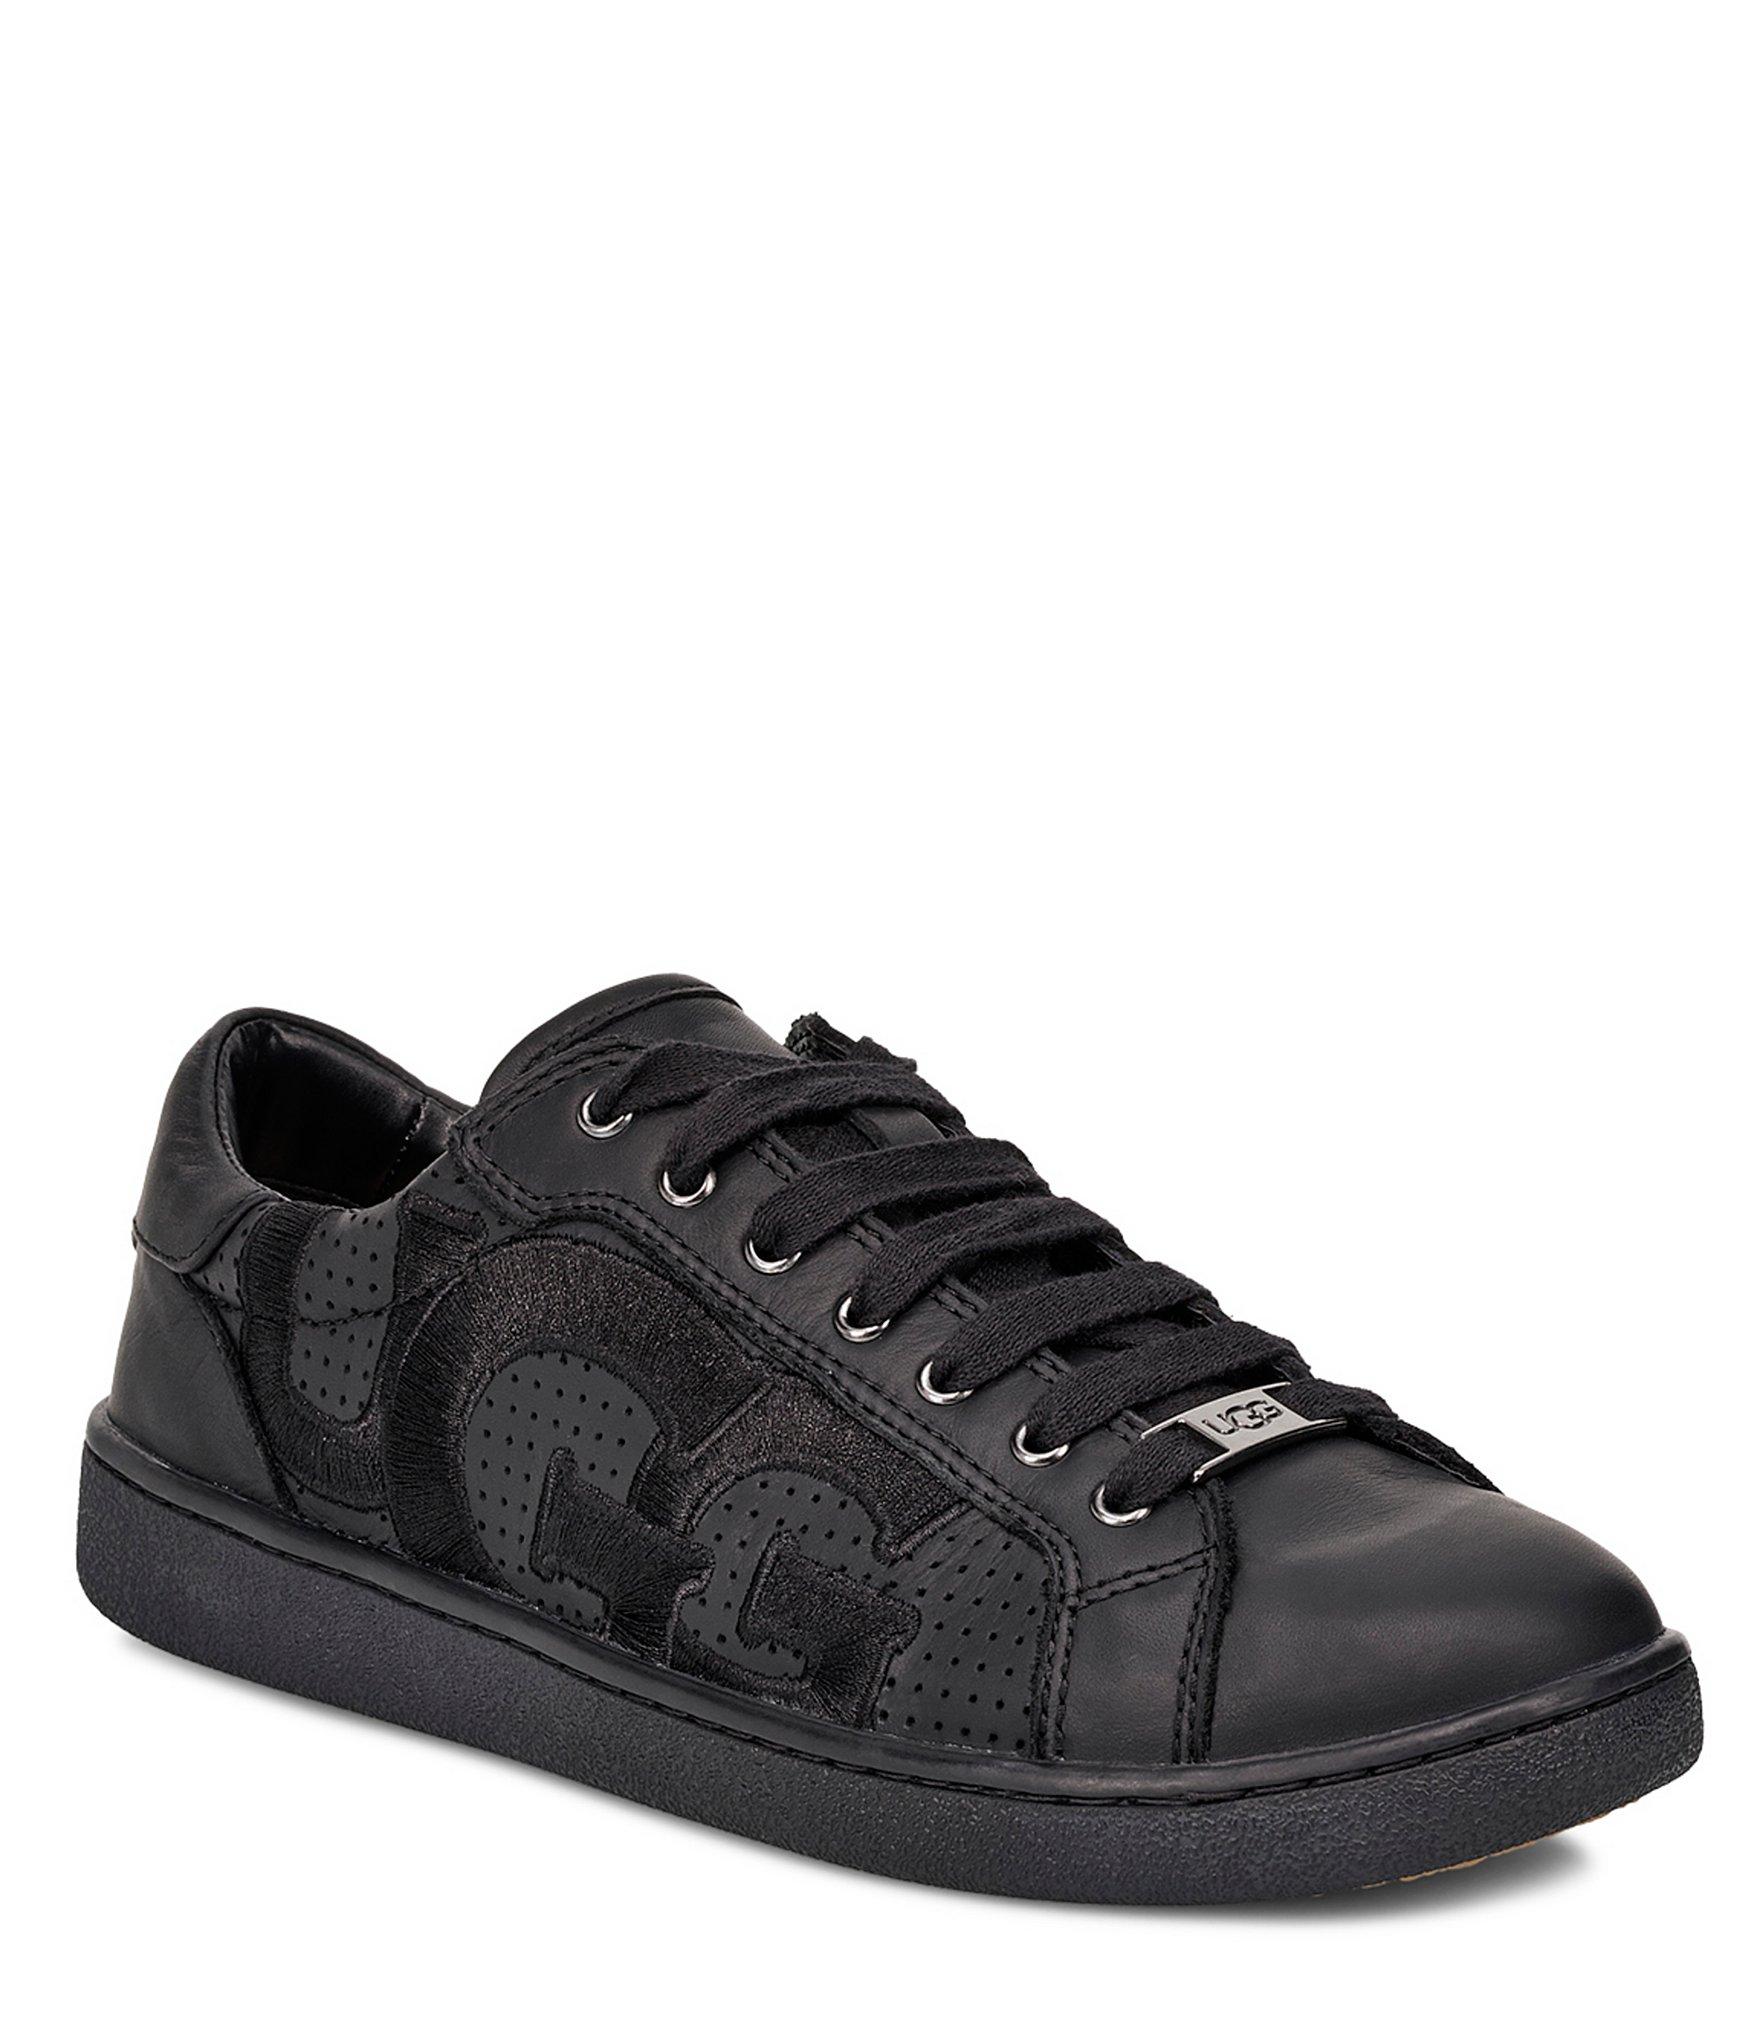 UGG Milo Graphic Logo Sneakers in Black - Save 15% - Lyst